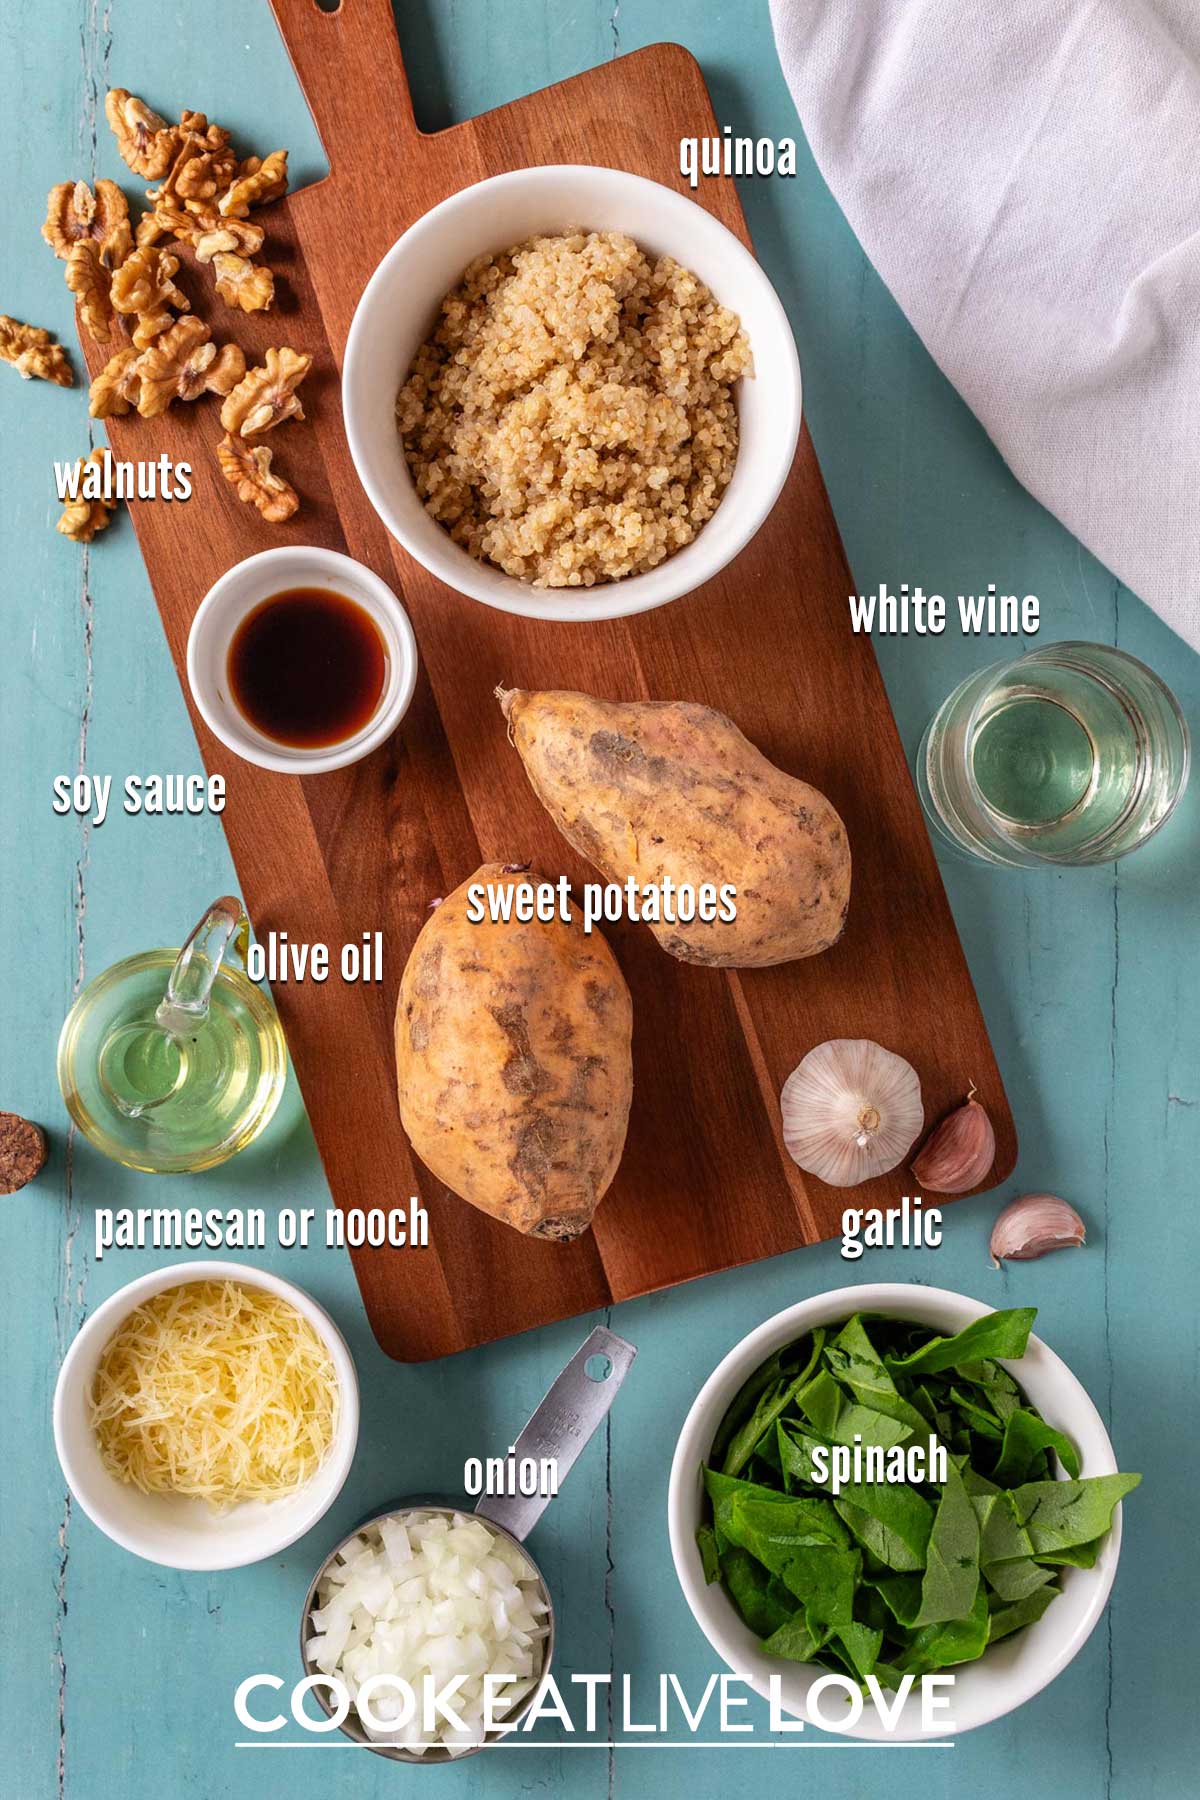 Ingredients to make baked stuffed sweet potatoes on the table.